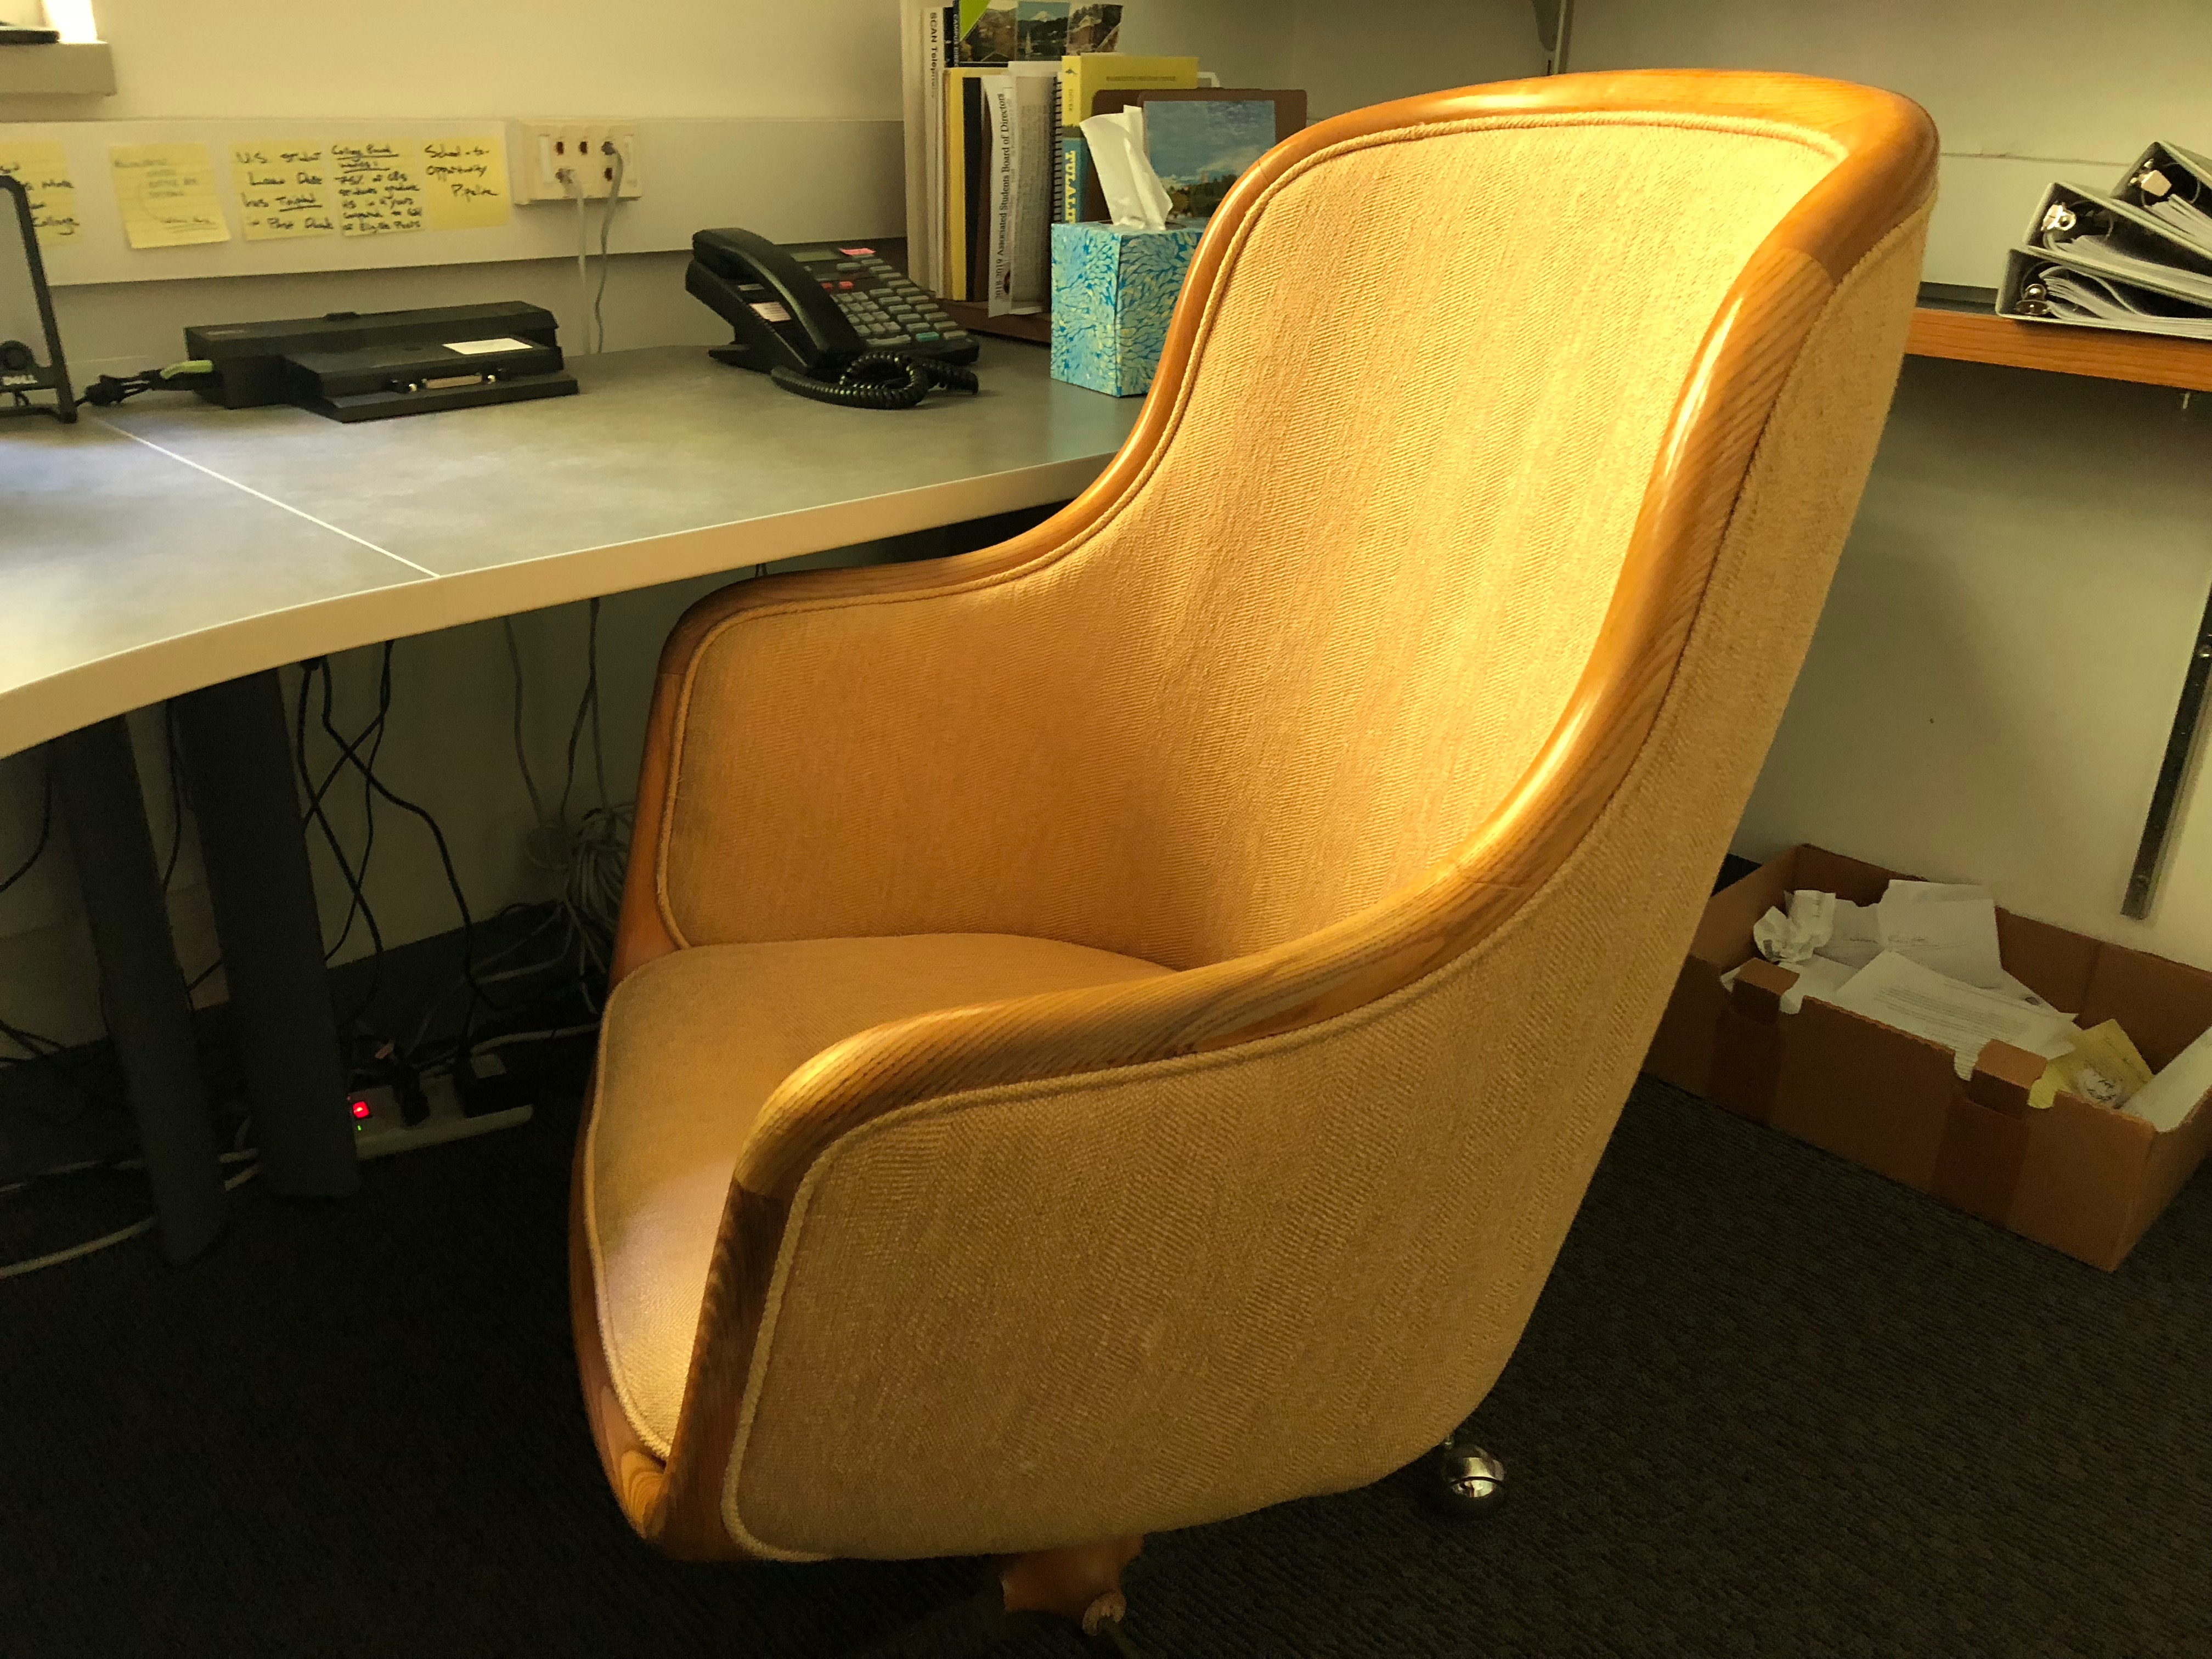 a 1980s-style yellow upholstered desk chair